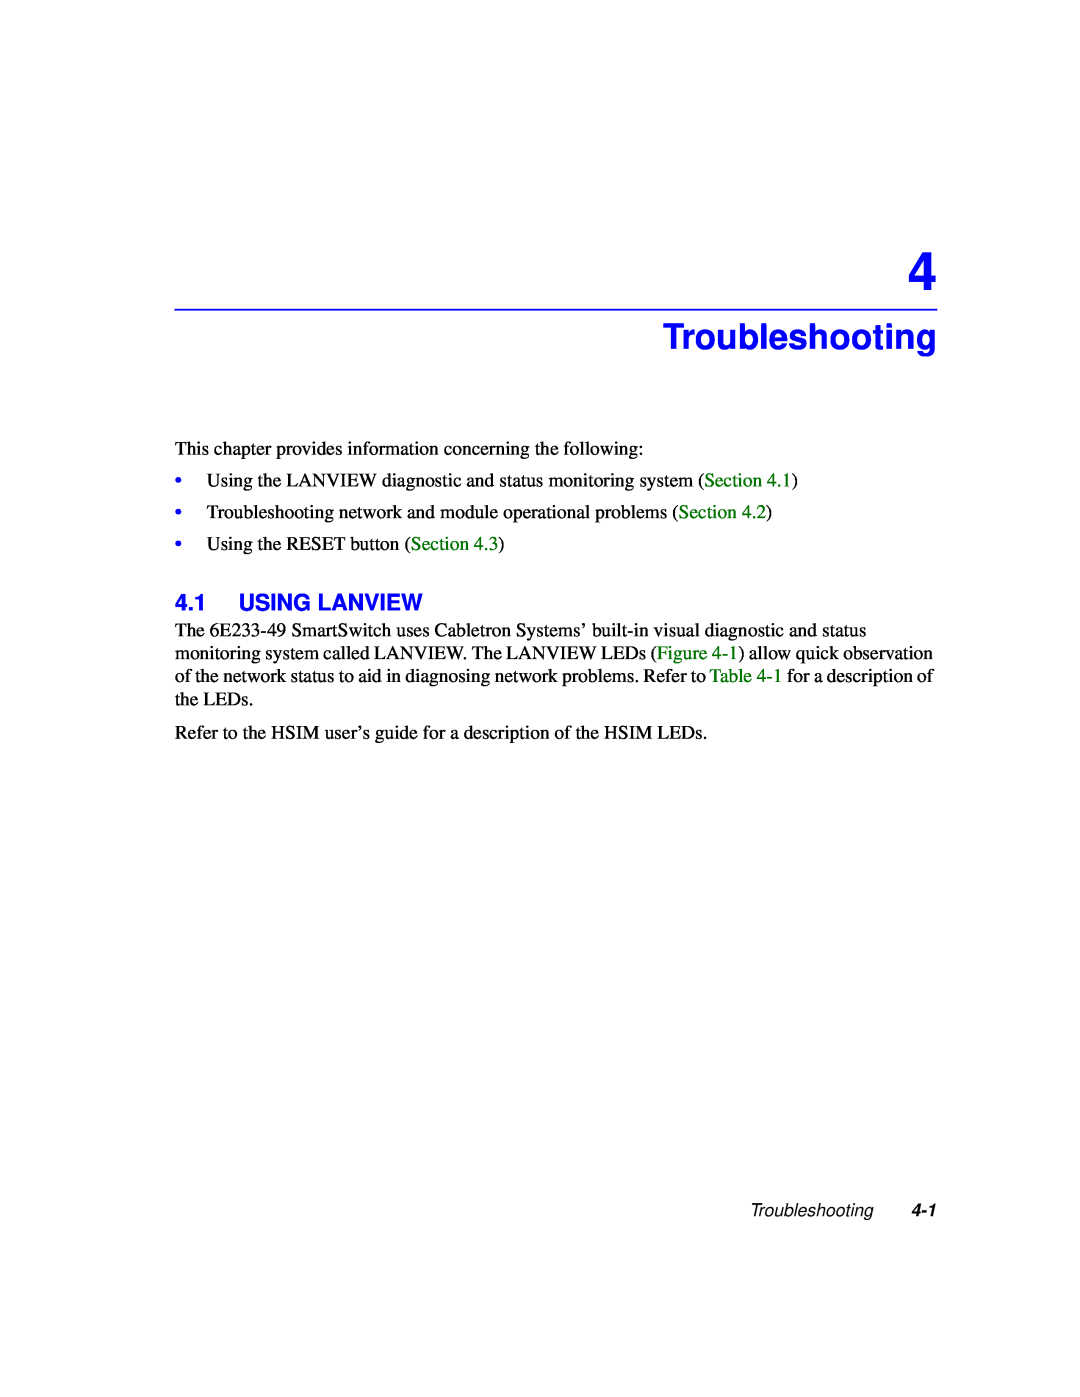 Cabletron Systems 6000 manual Troubleshooting, Using Lanview 